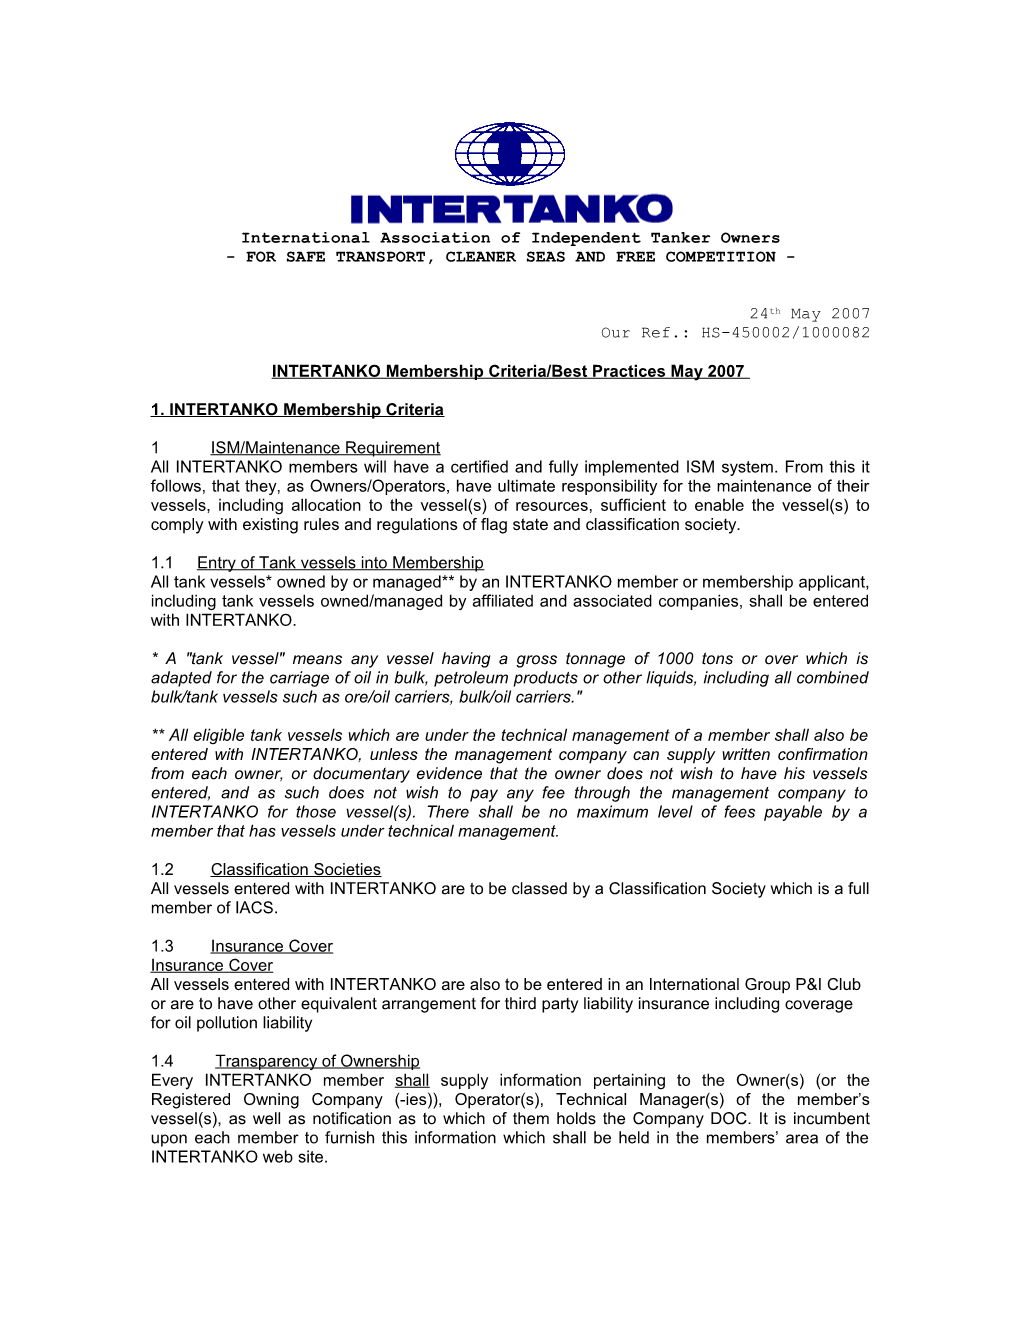 International Association of Independent Tanker Owners s3